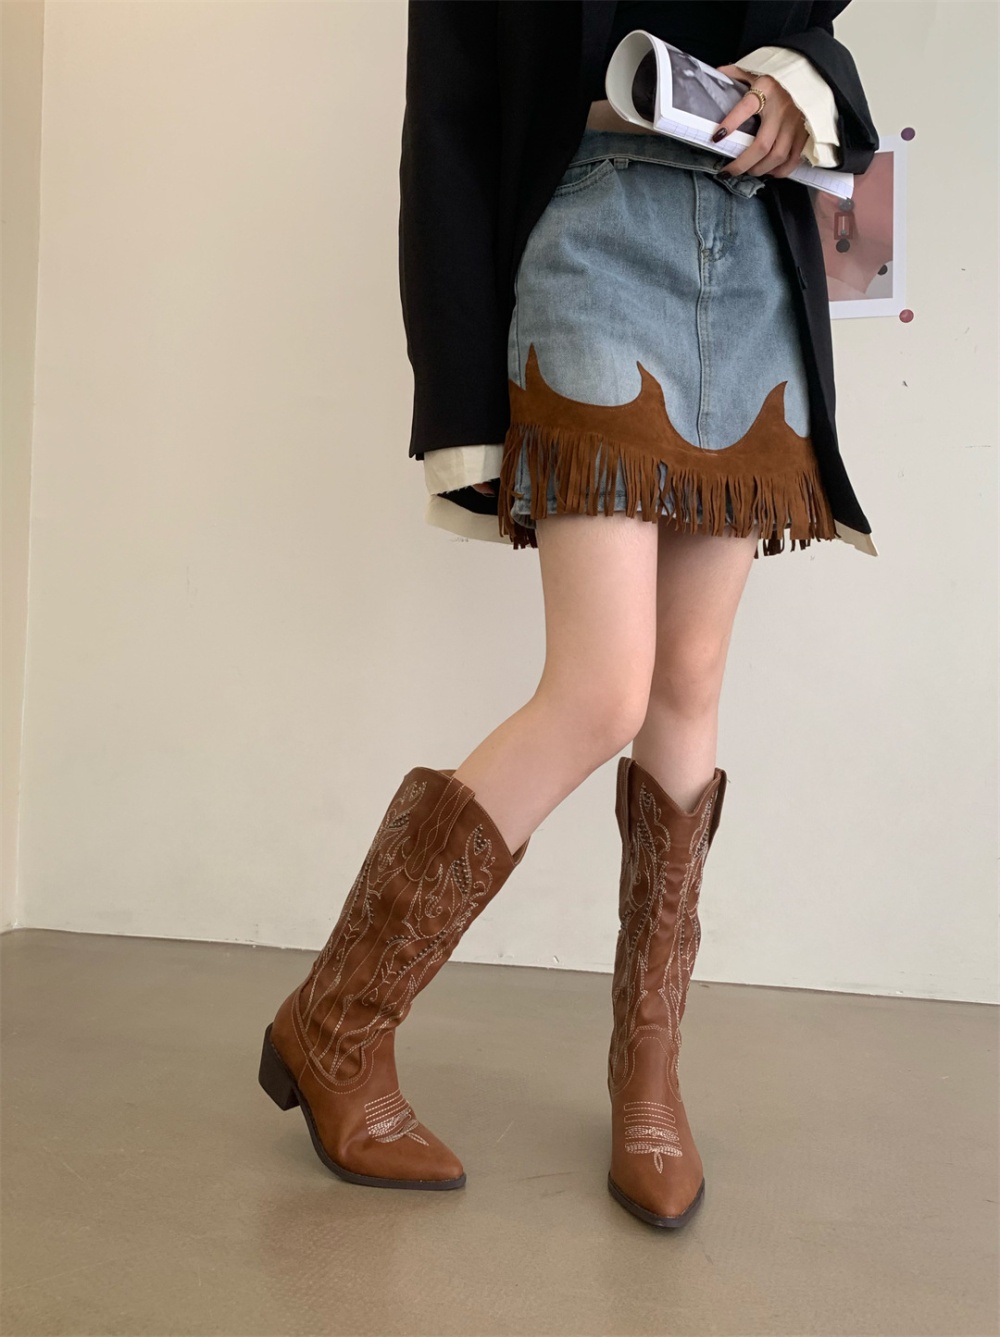 Fashion long tube denim embroidery boots for women